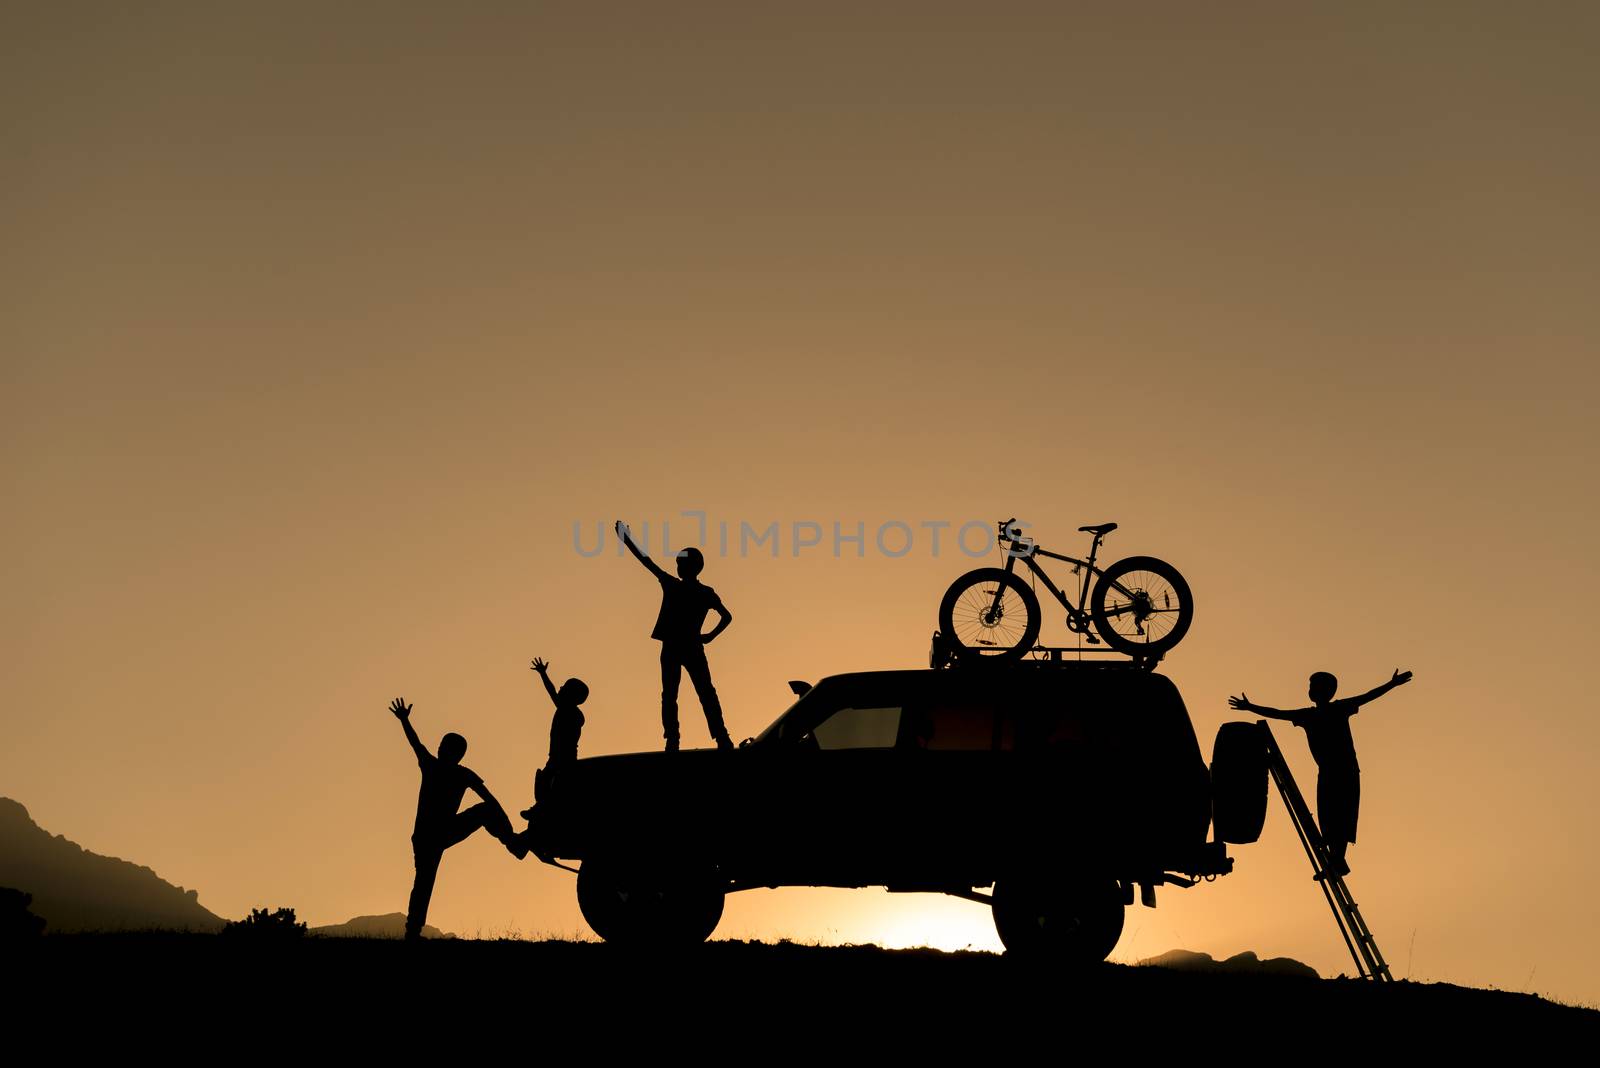 suv,bicycle and adventure in nature by crazymedia007